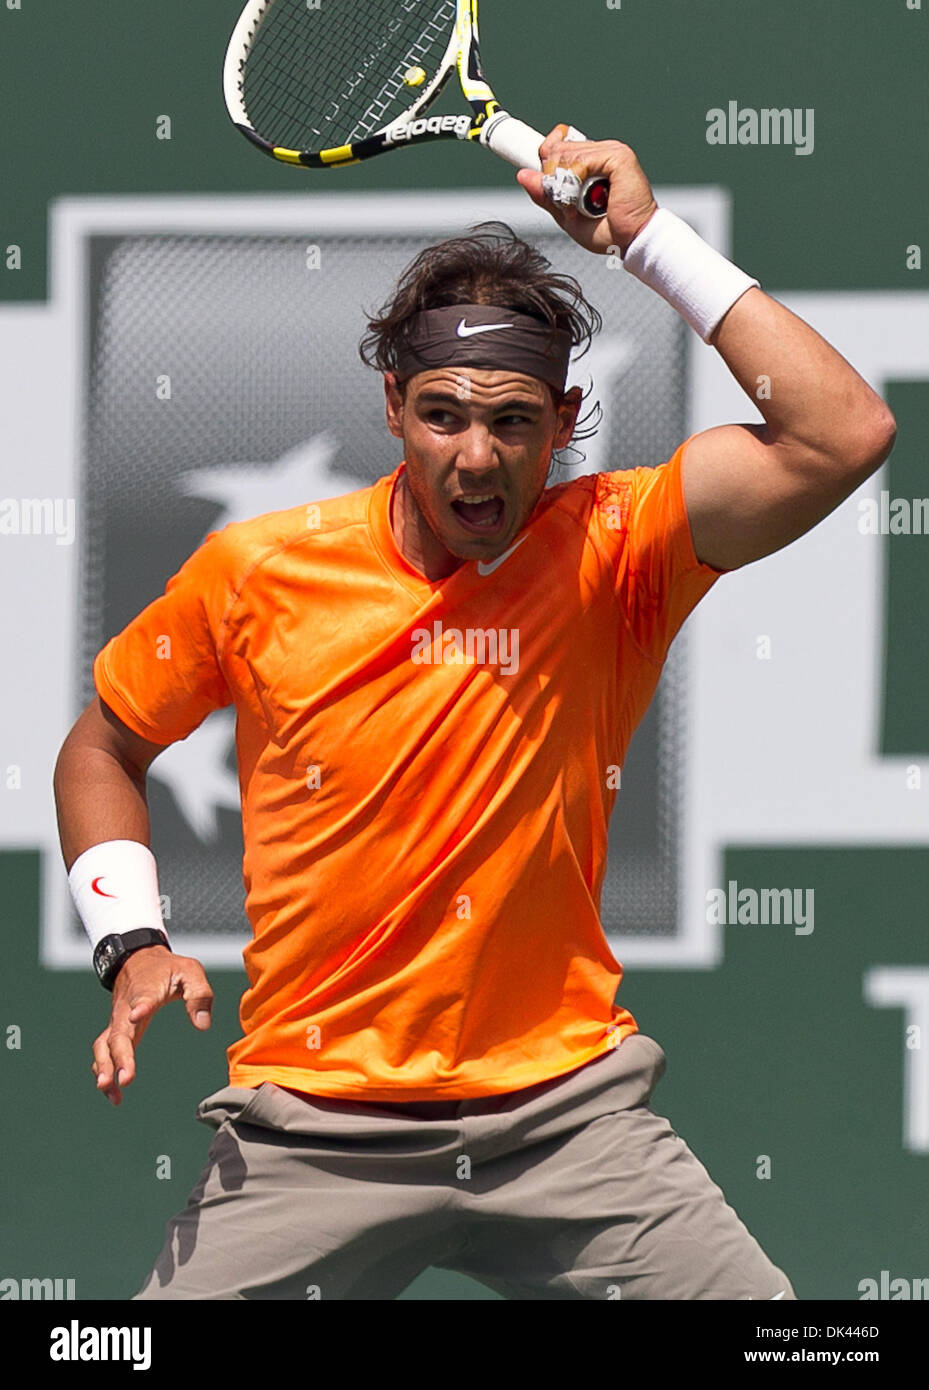 Mar. 19, 2011 - Indian Wells, California, U.S - No. 1 seed Rafael Nadal (ESP) in action during the men's semifinals match of the 2011 BNP Paribas Open held at the Indian Wells Tennis Garden in Indian Wells, California. Nadal won with a score of 5-7, 6-1, 7-6(7) (Credit Image: © Gerry Maceda/Southcreek Global/ZUMAPRESS.com) Stock Photo